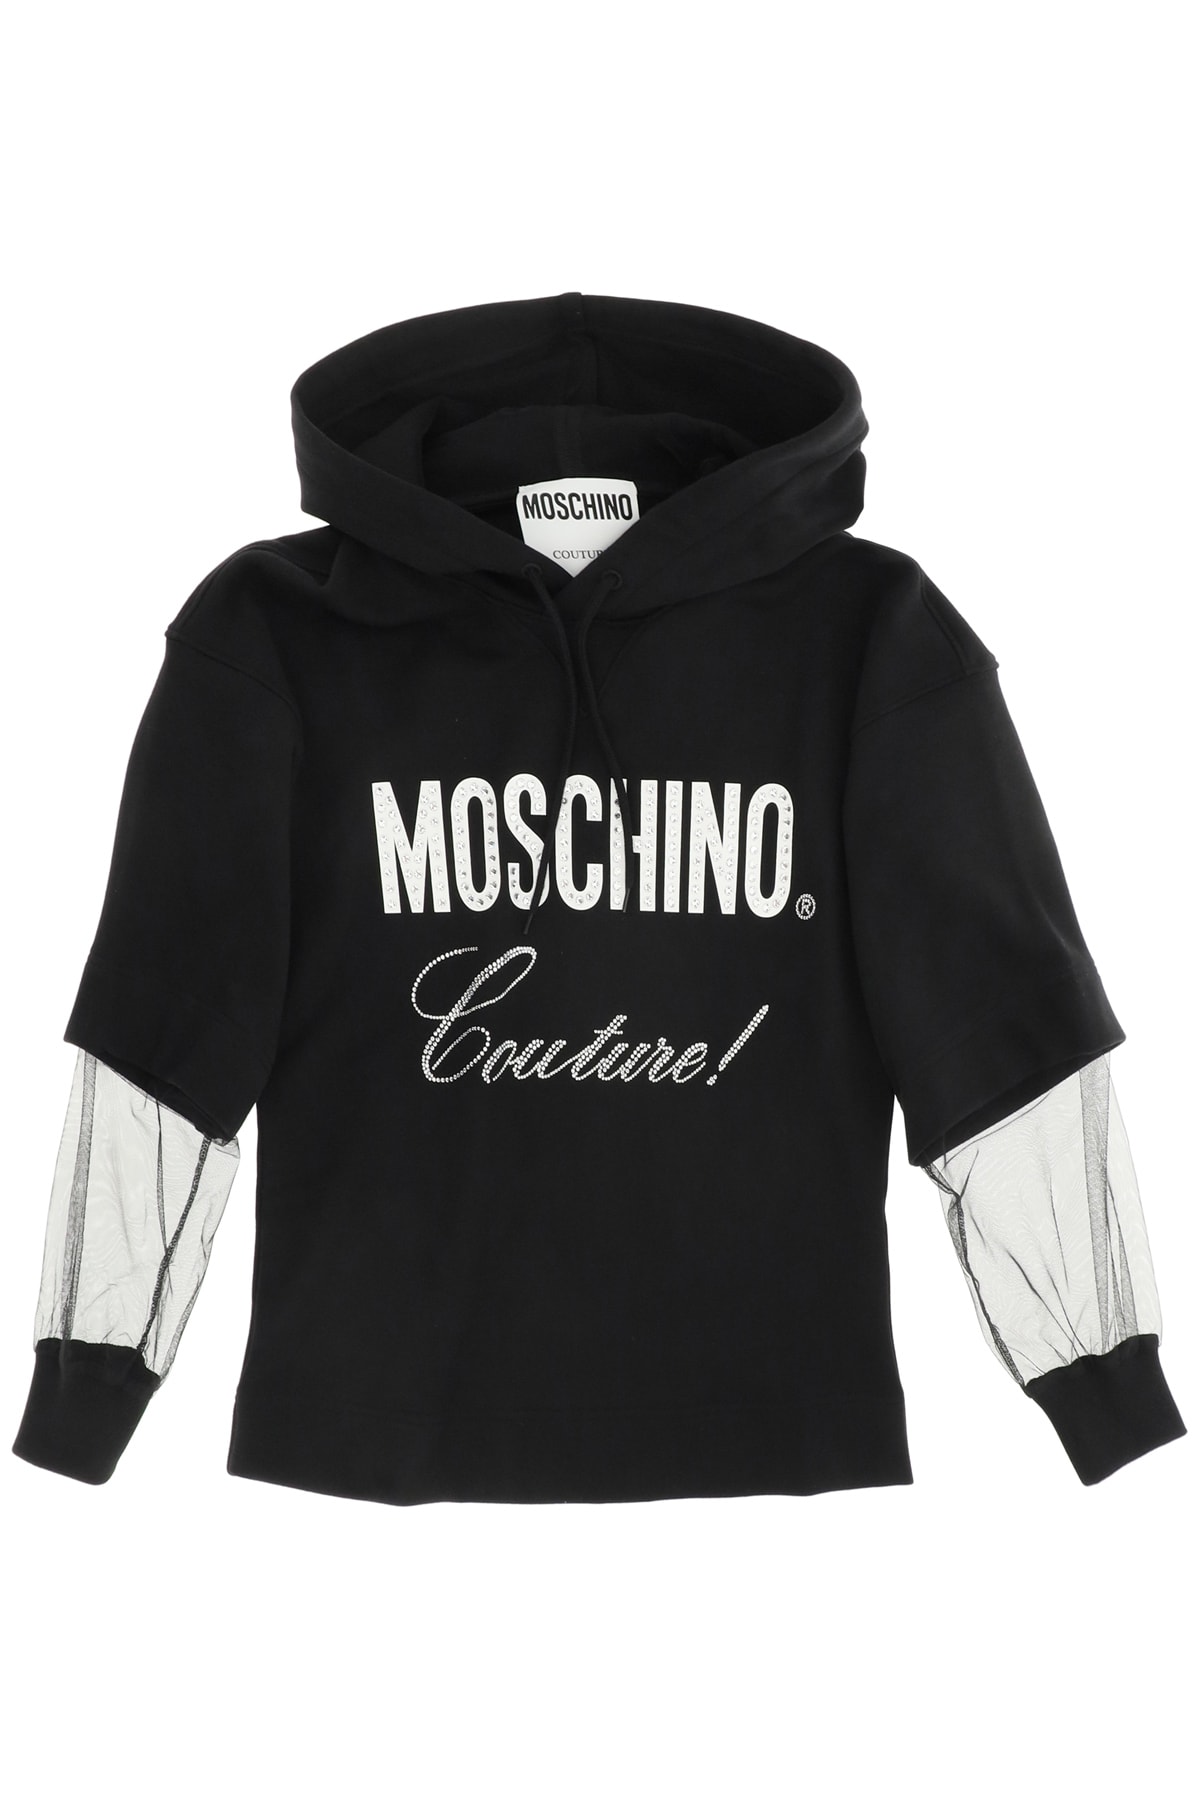 Moschino Moschino Couture Sweatshirt With Tulle Inserts